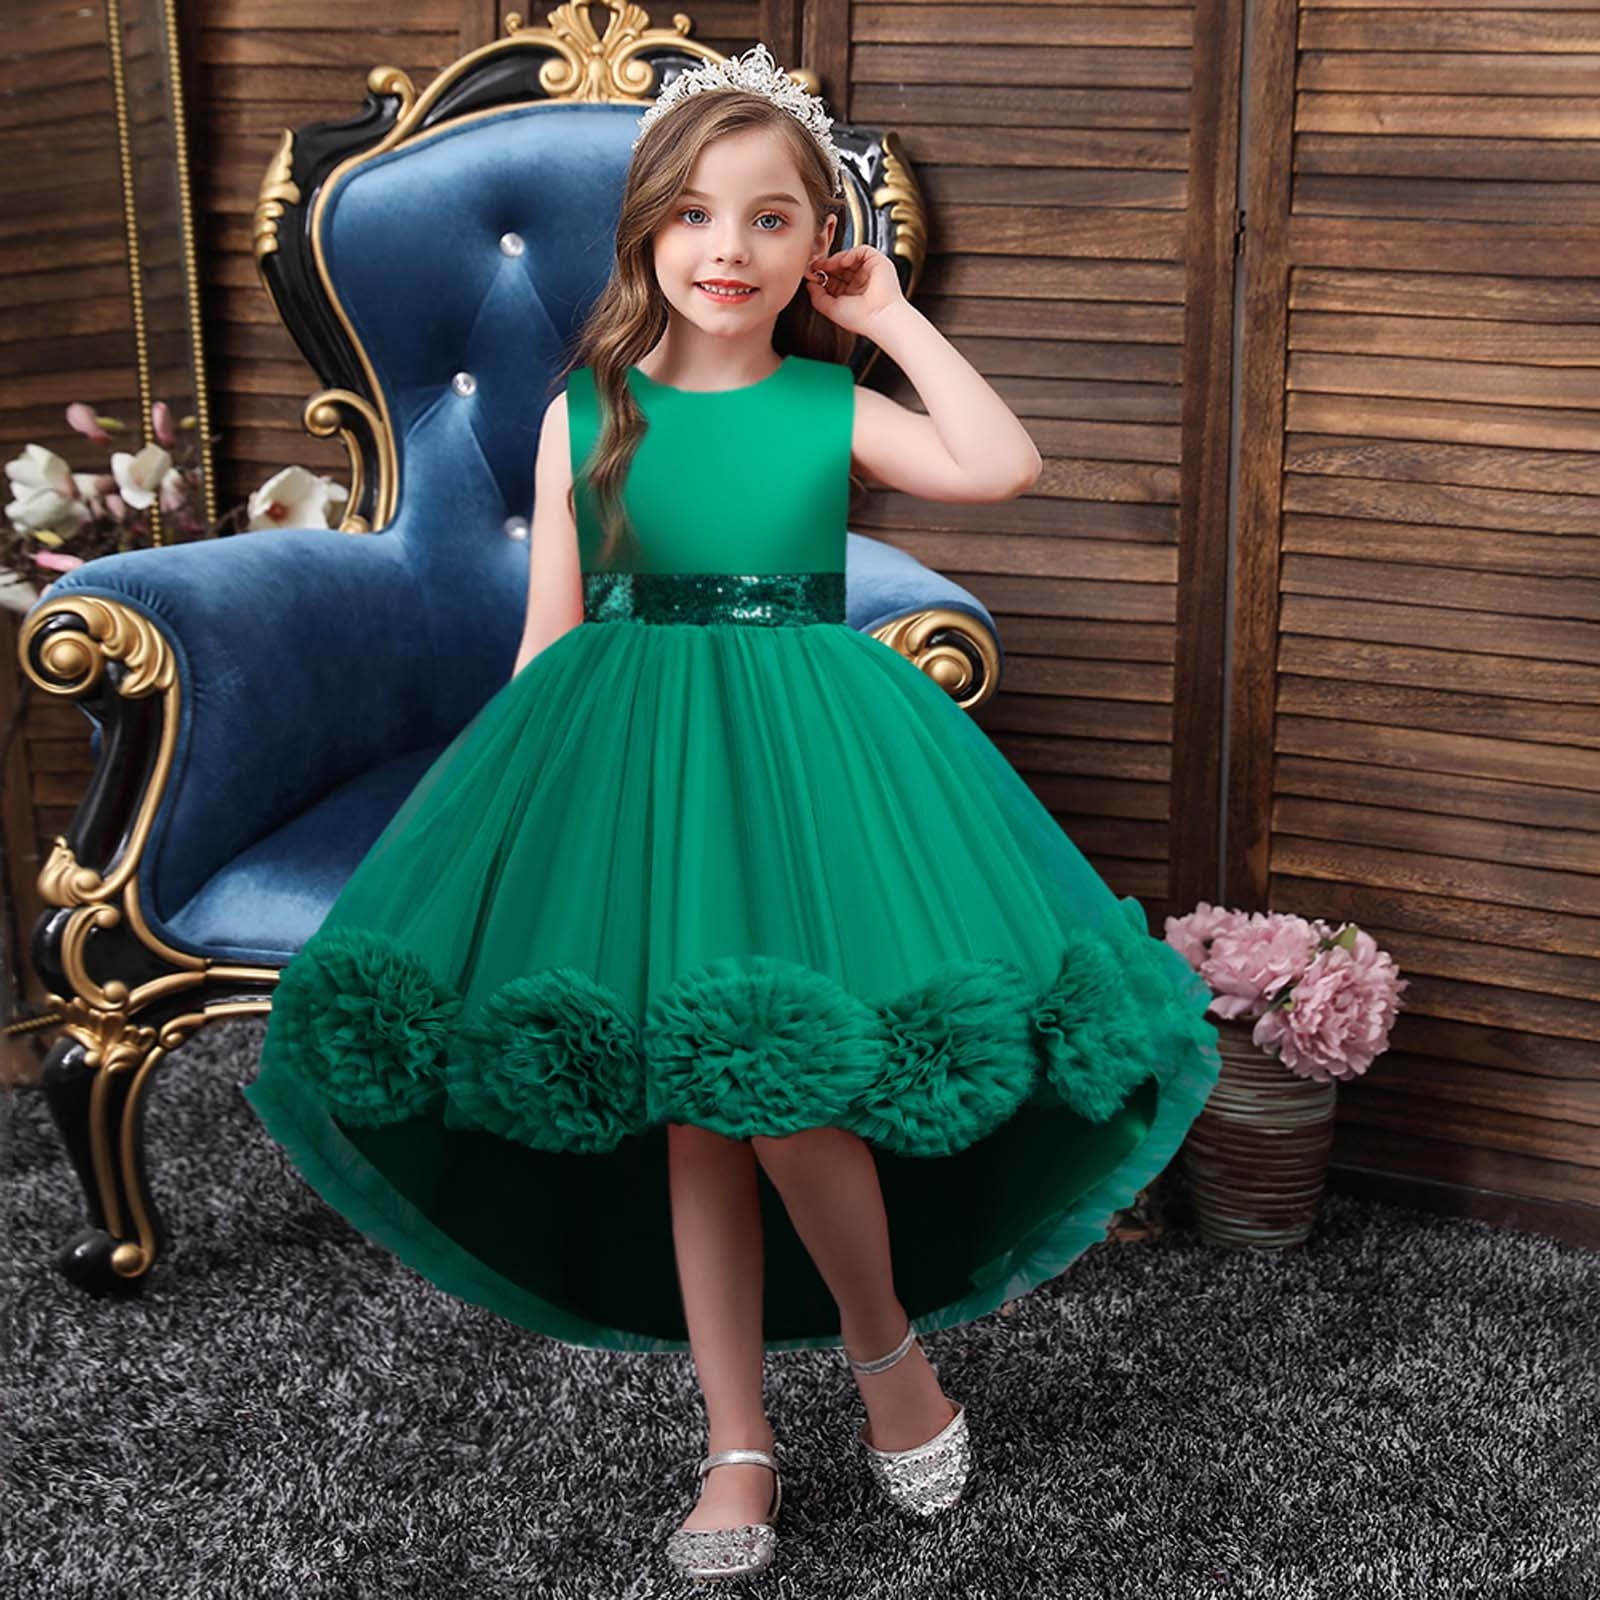 Buy DreamHigh Sleeping Beauty Princess Aurora Party Girls Costume Dress  Size 5-6 Years Online at Low Prices in India - Amazon.in